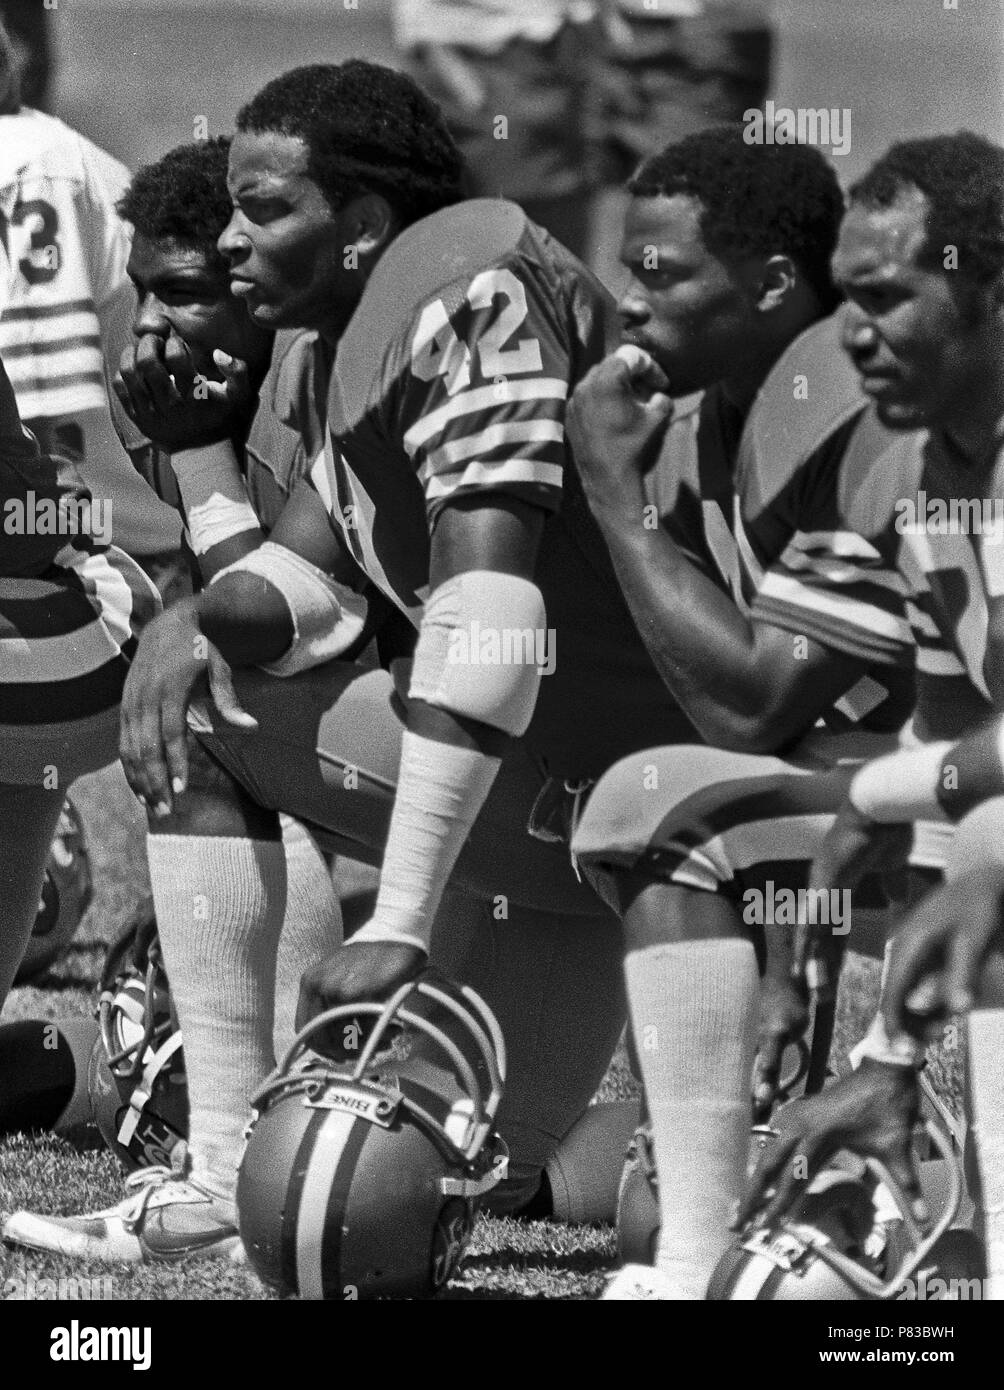 Ronnie lott Black and White Stock Photos & Images - Alamy